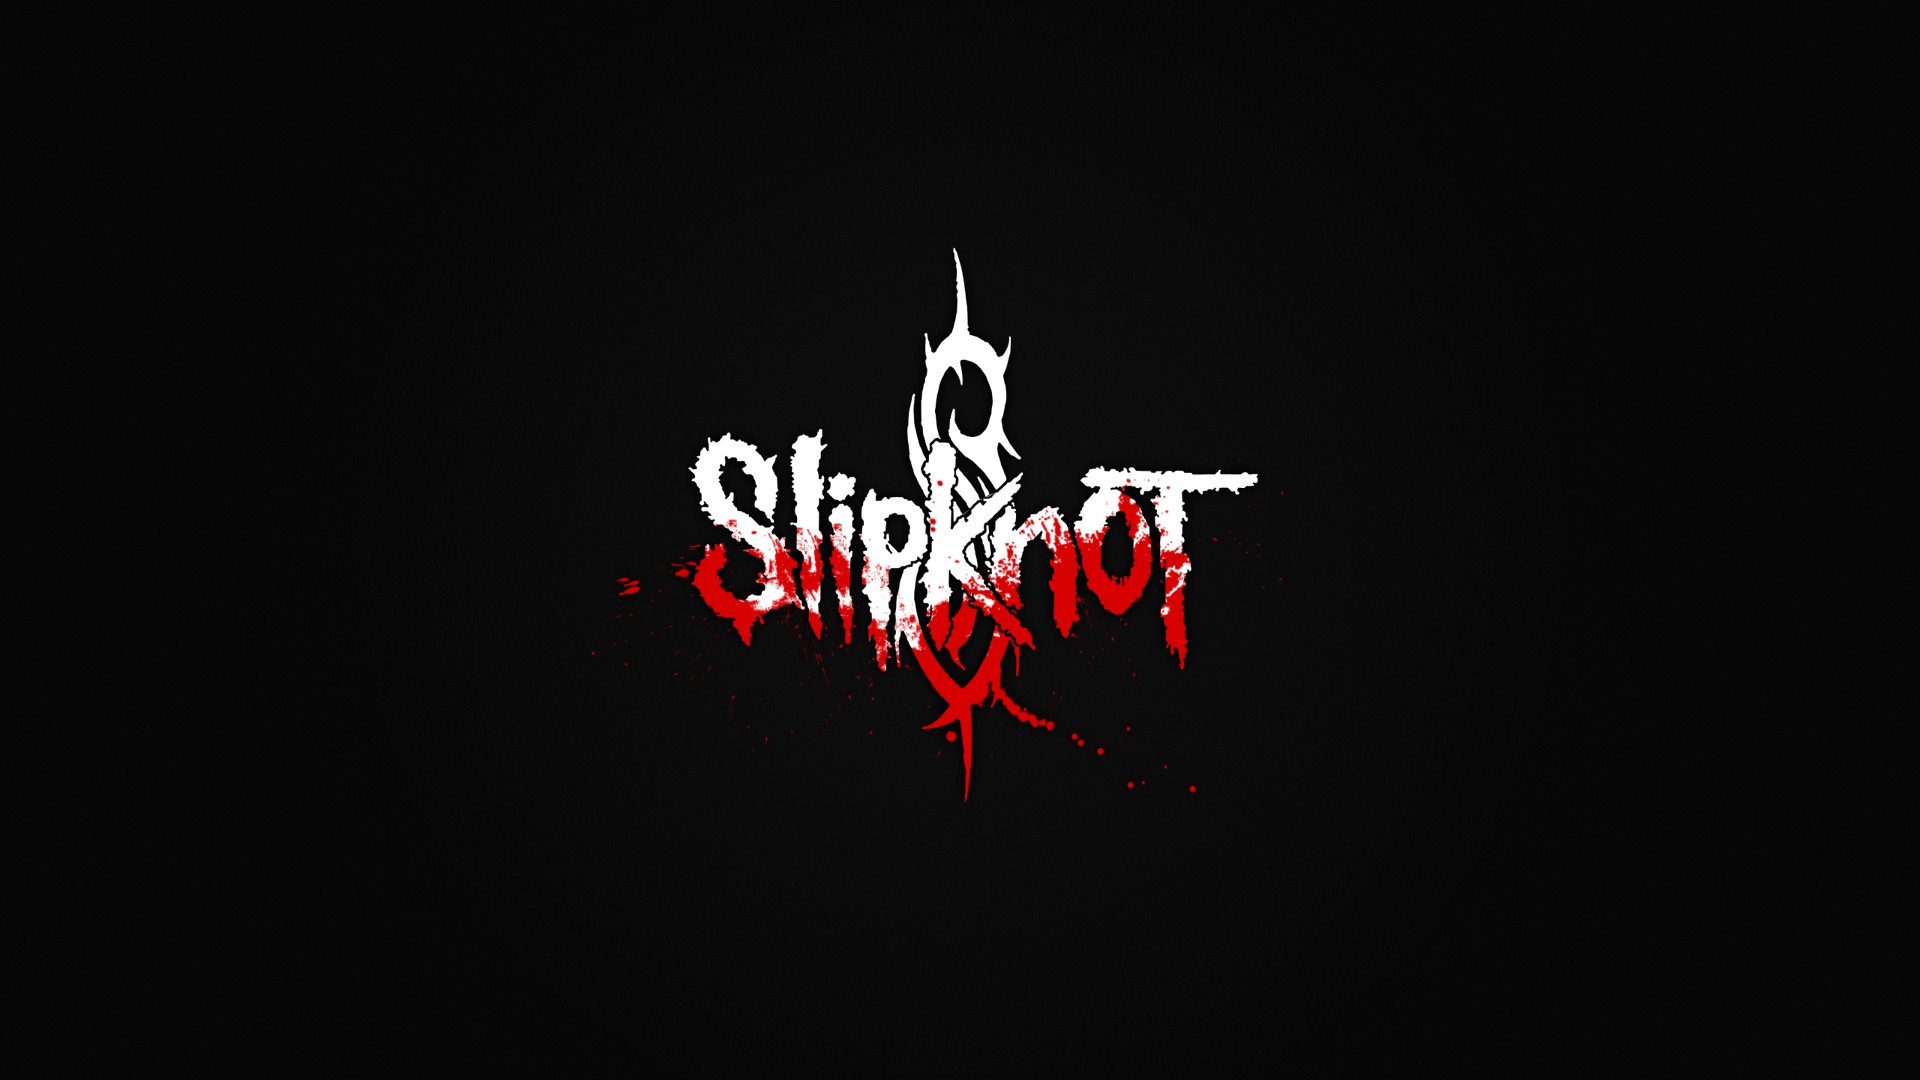  Slipknot Wallpaper HD and backgrounds Free  APK for Android Download